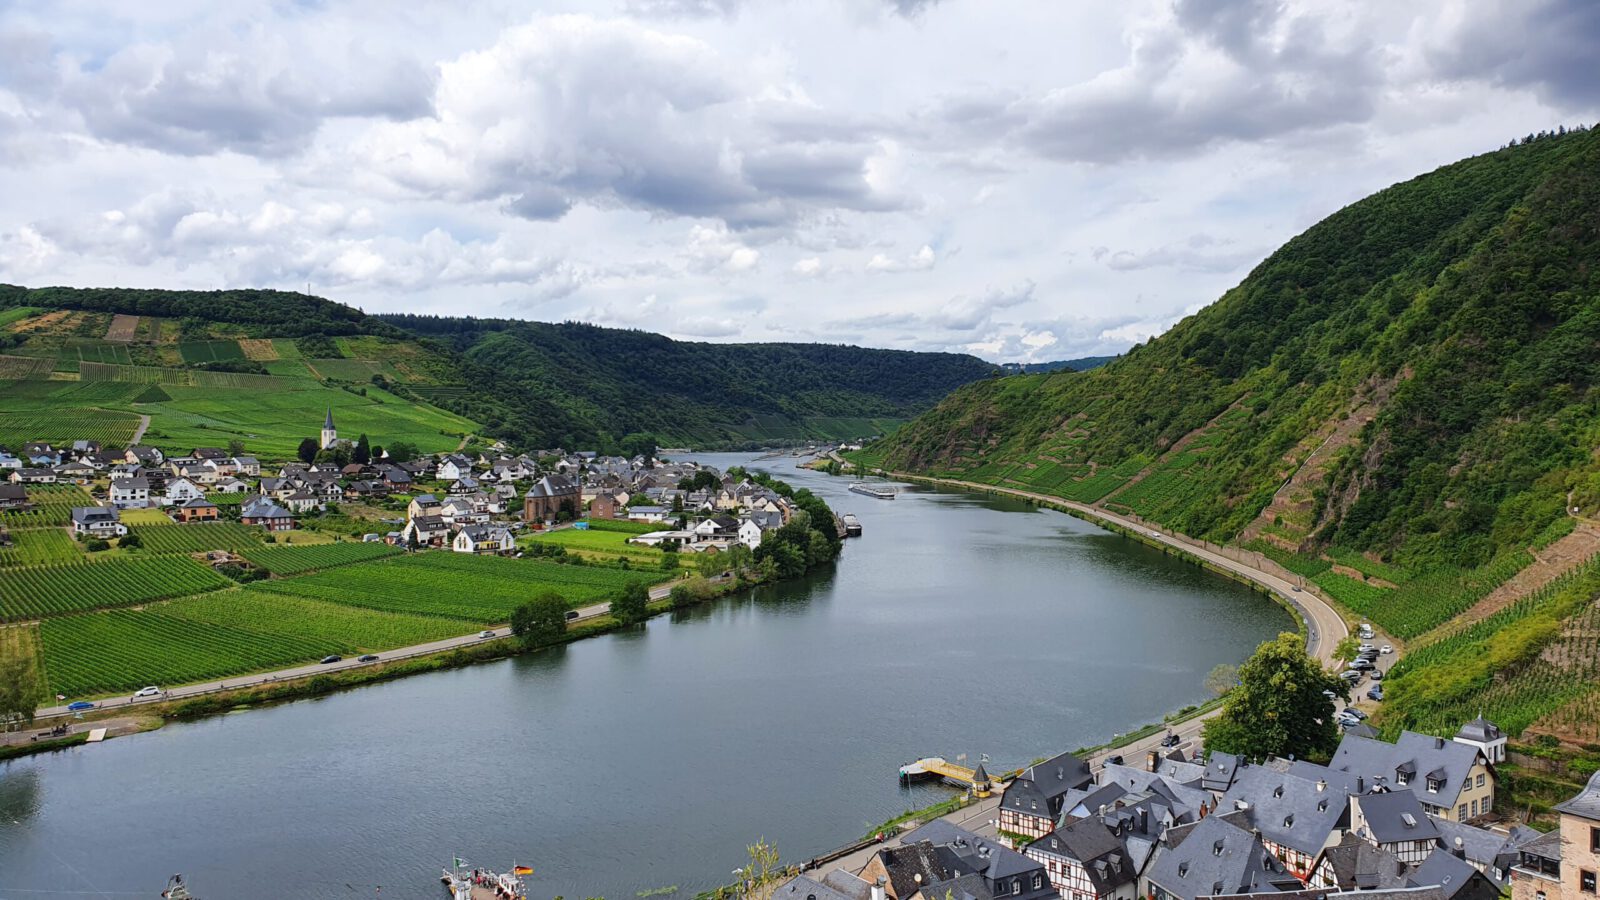 Arriving at the Moselle